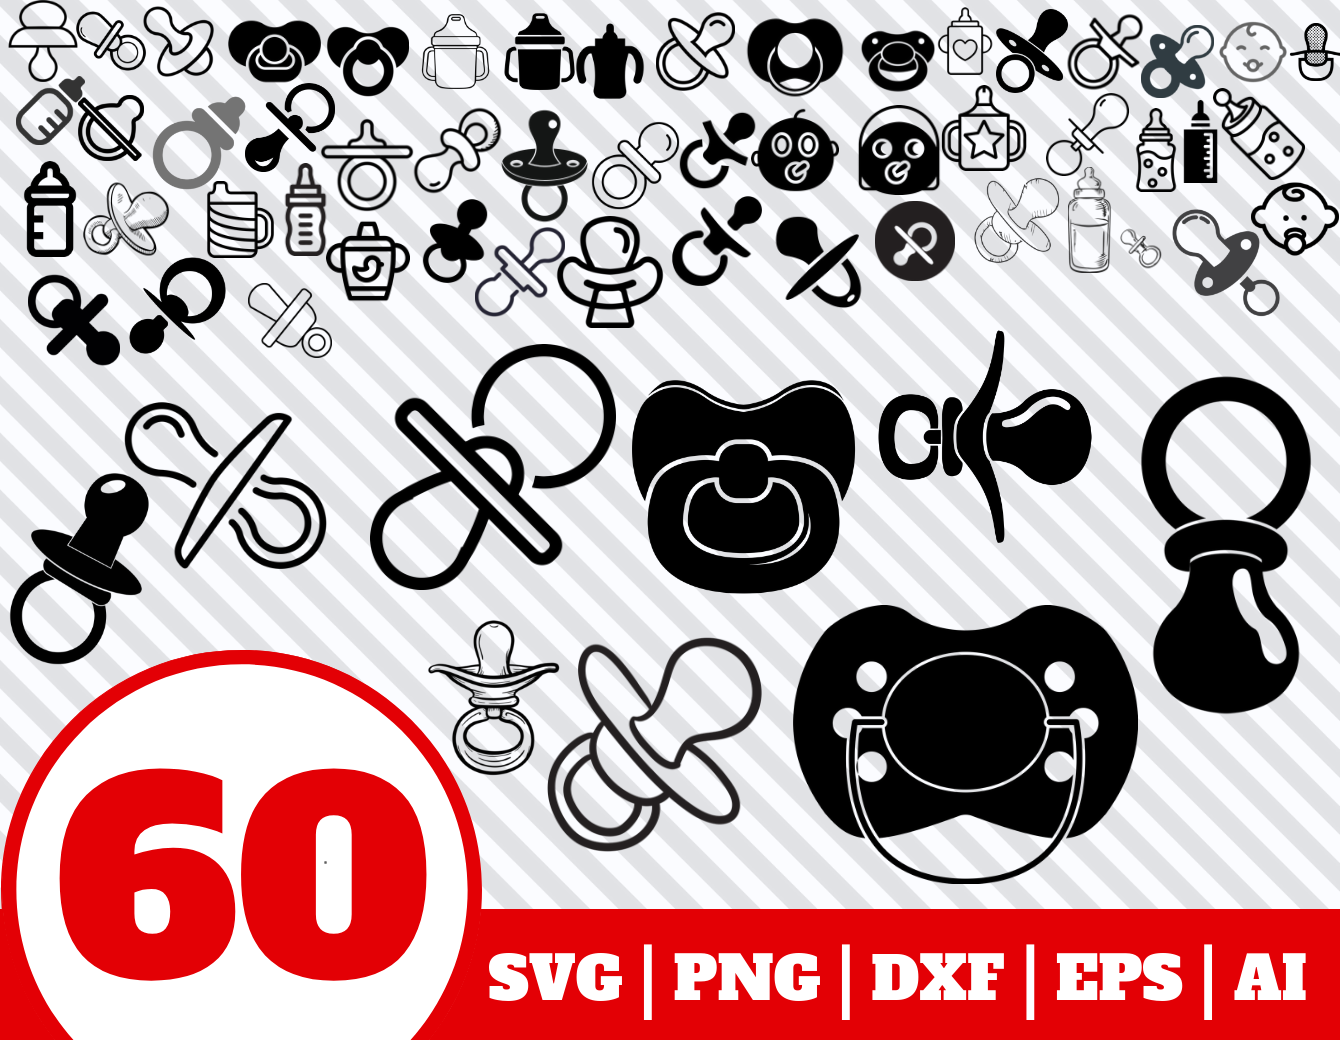 60 BABY PACIFIER SVG - baby pacifier clipart - baby shower ...